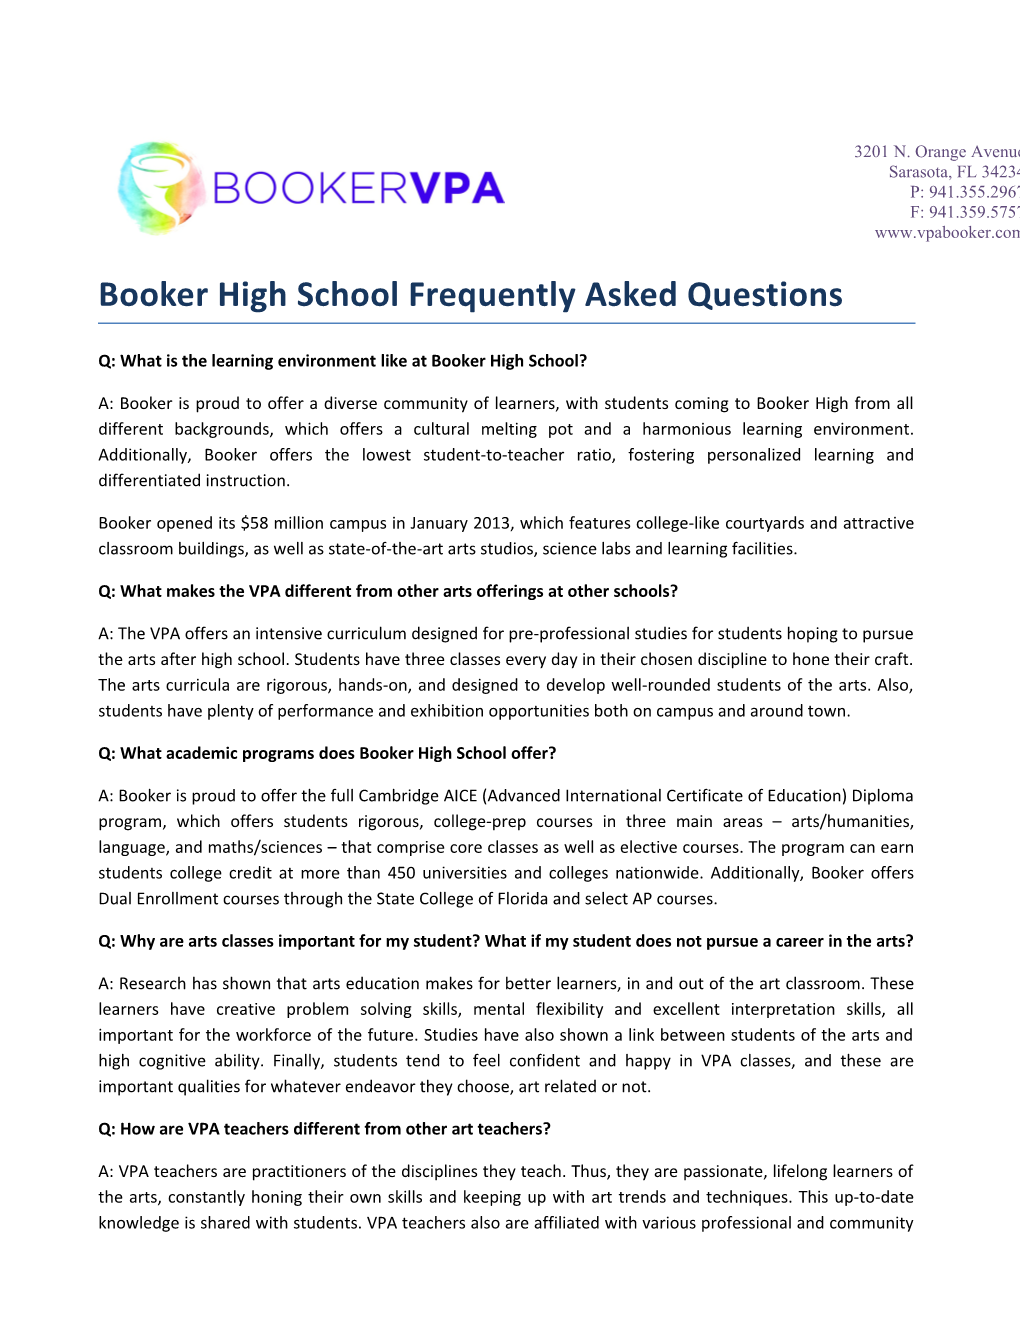 Q: What Is the Learning Environment Like at Booker High School?